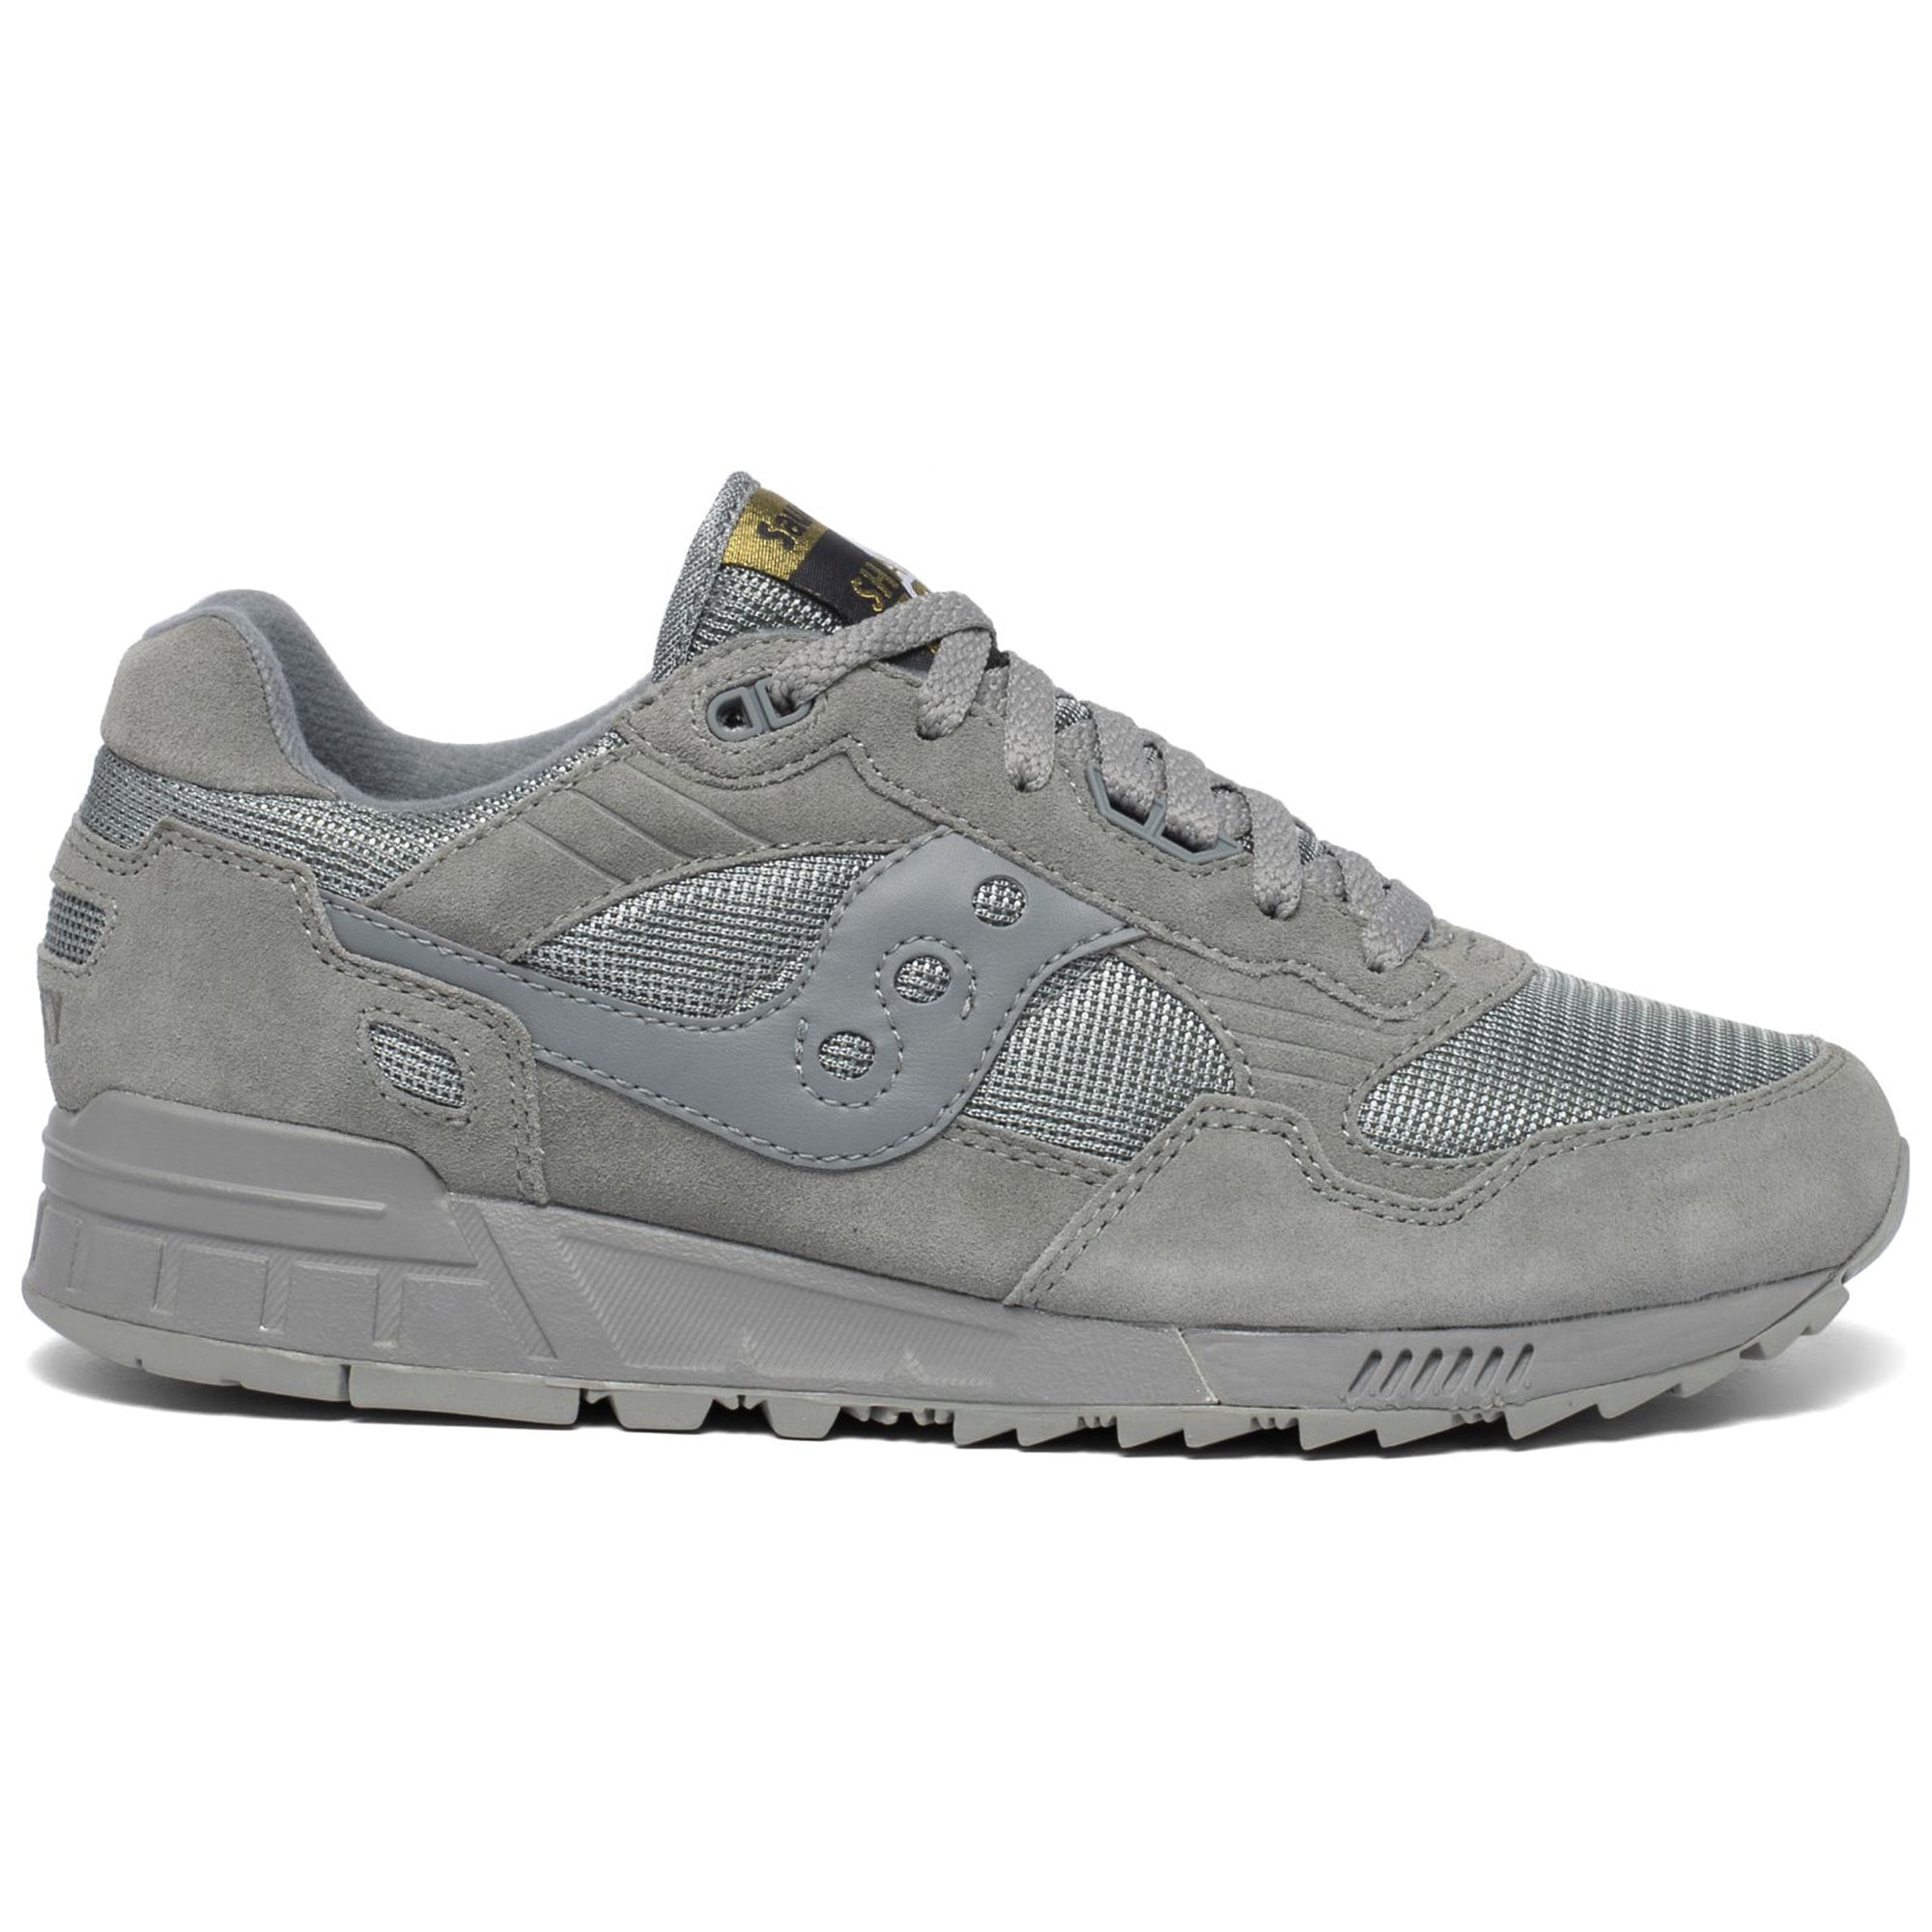 Saucony Shadow 5000 Trainers - Monument/Dove